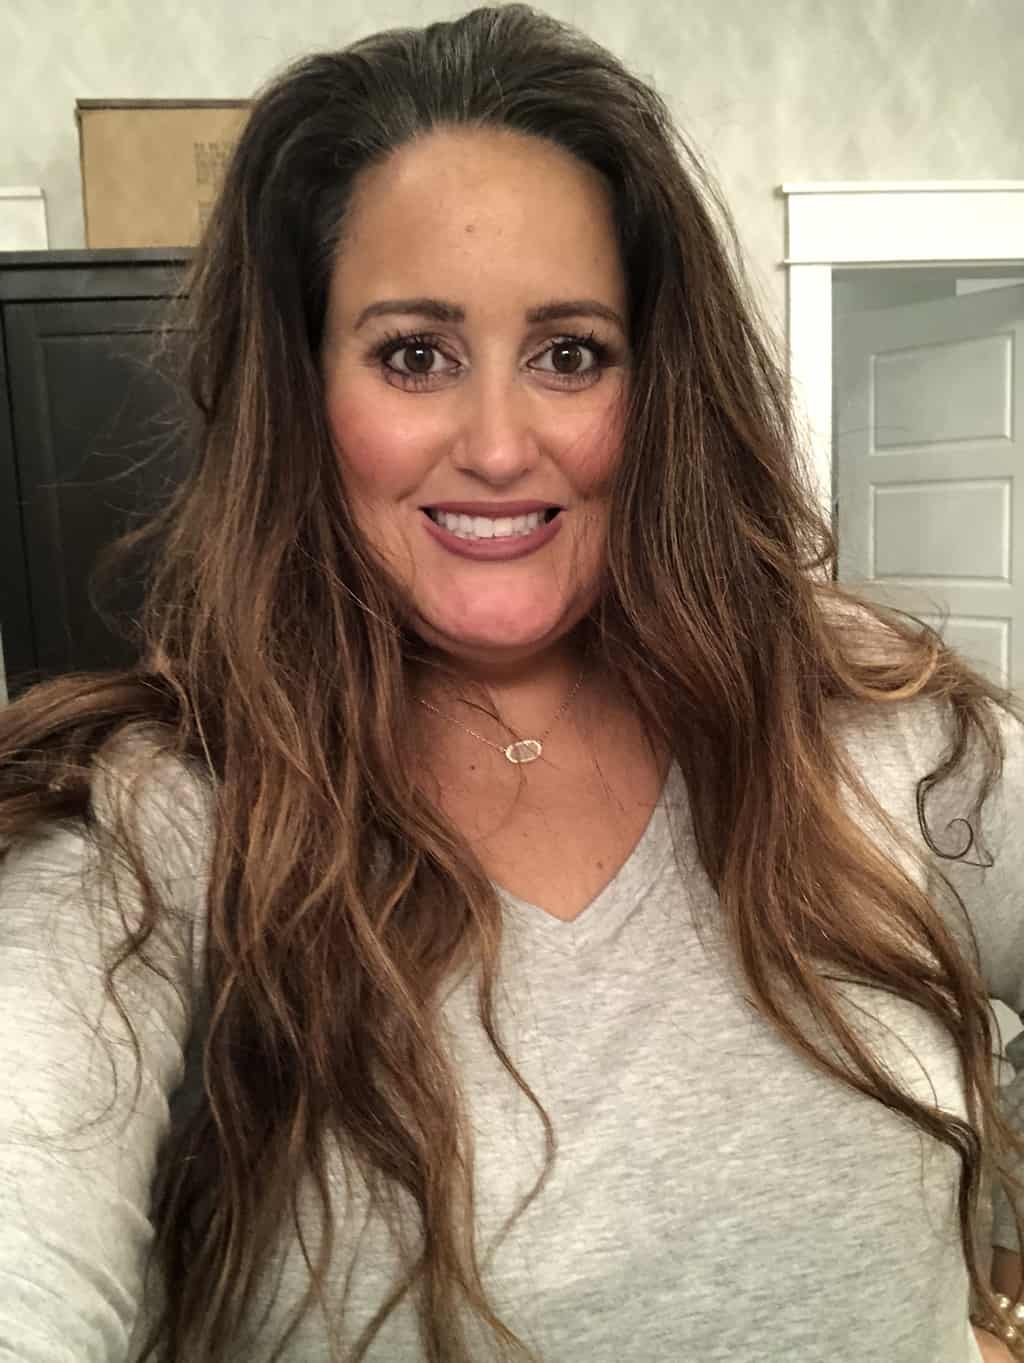 Picture of woman with long brown hair and makeup on. Her eyelashes look amazing and are curled.  She is standing up in a bathroom and has a grey shirt on and a Kendra Scott necklace.